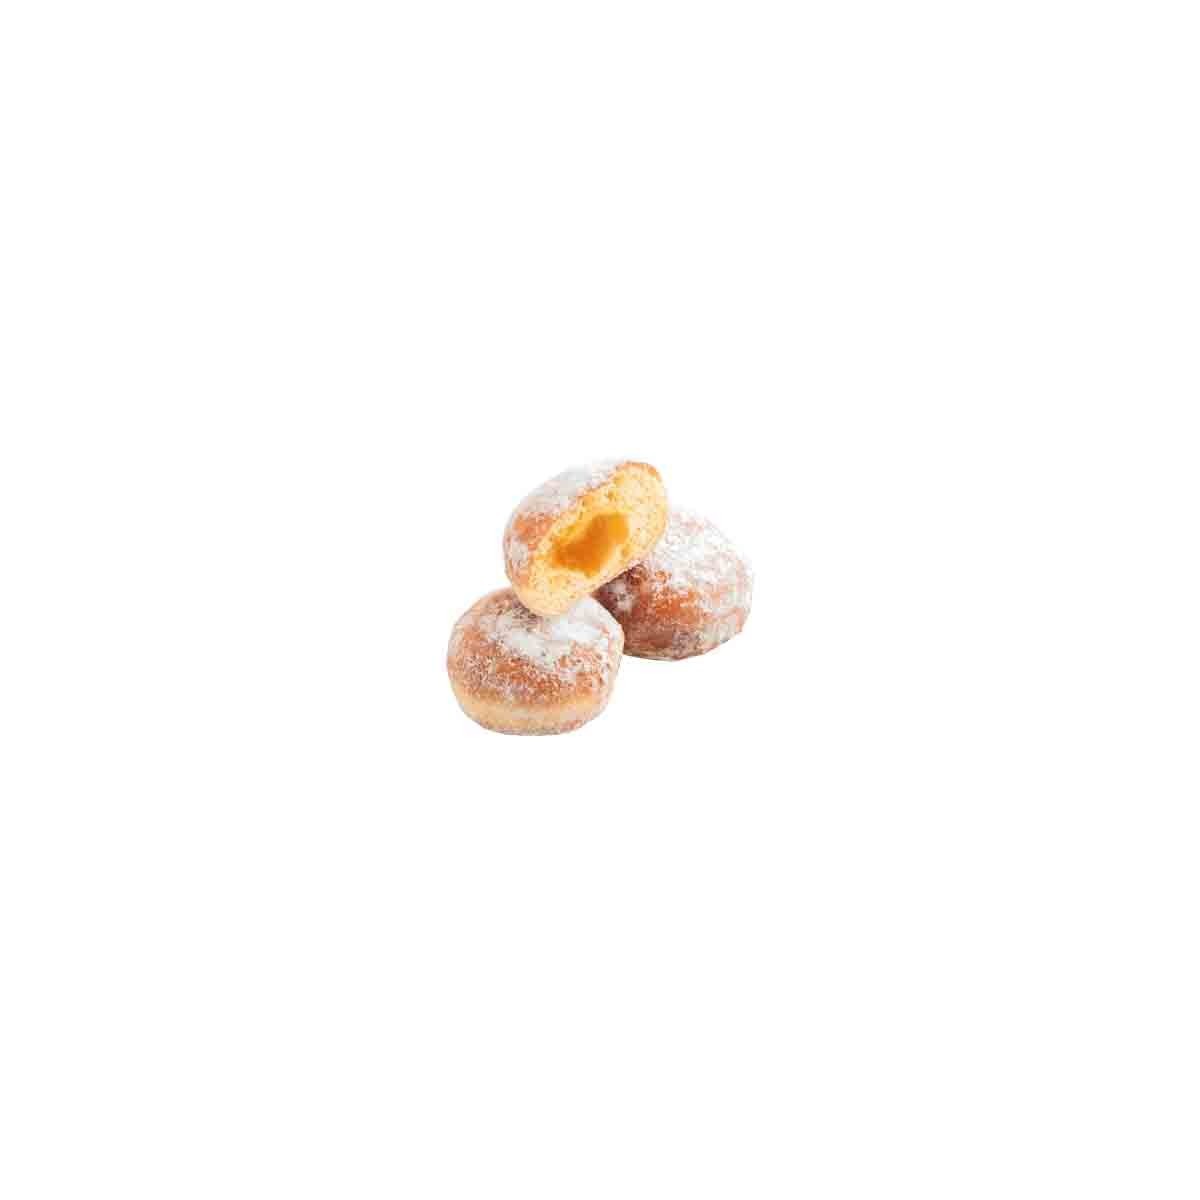 RMM 27058 MINI ROUND BEIGNET WITH APRICOT FILLING BAKED 70X21GR  BOX